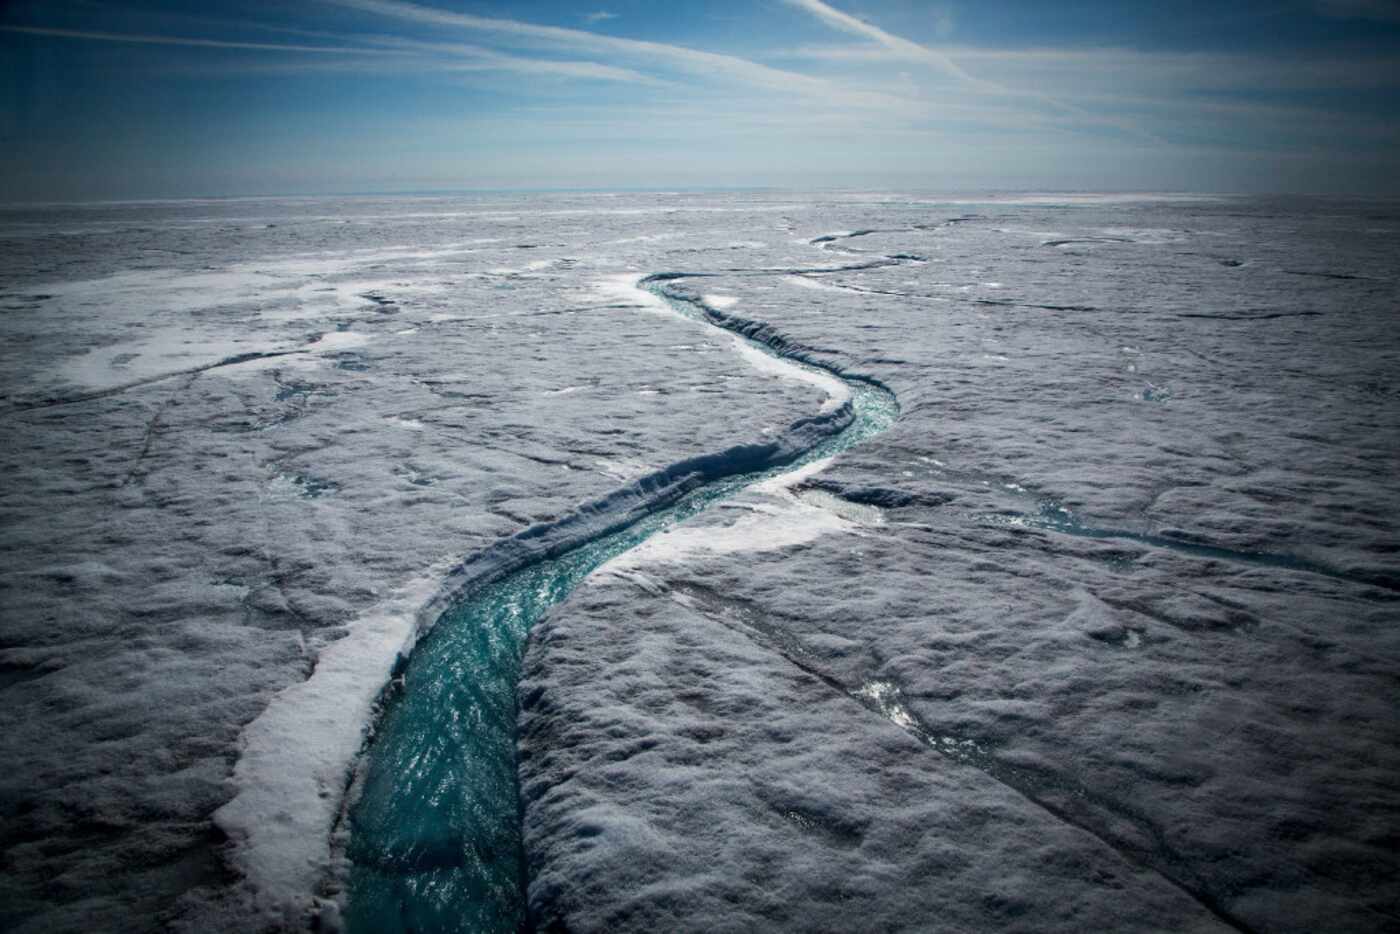  Meltwater flows along a supraglacial river on the Greenland ice sheet, one of the biggest...